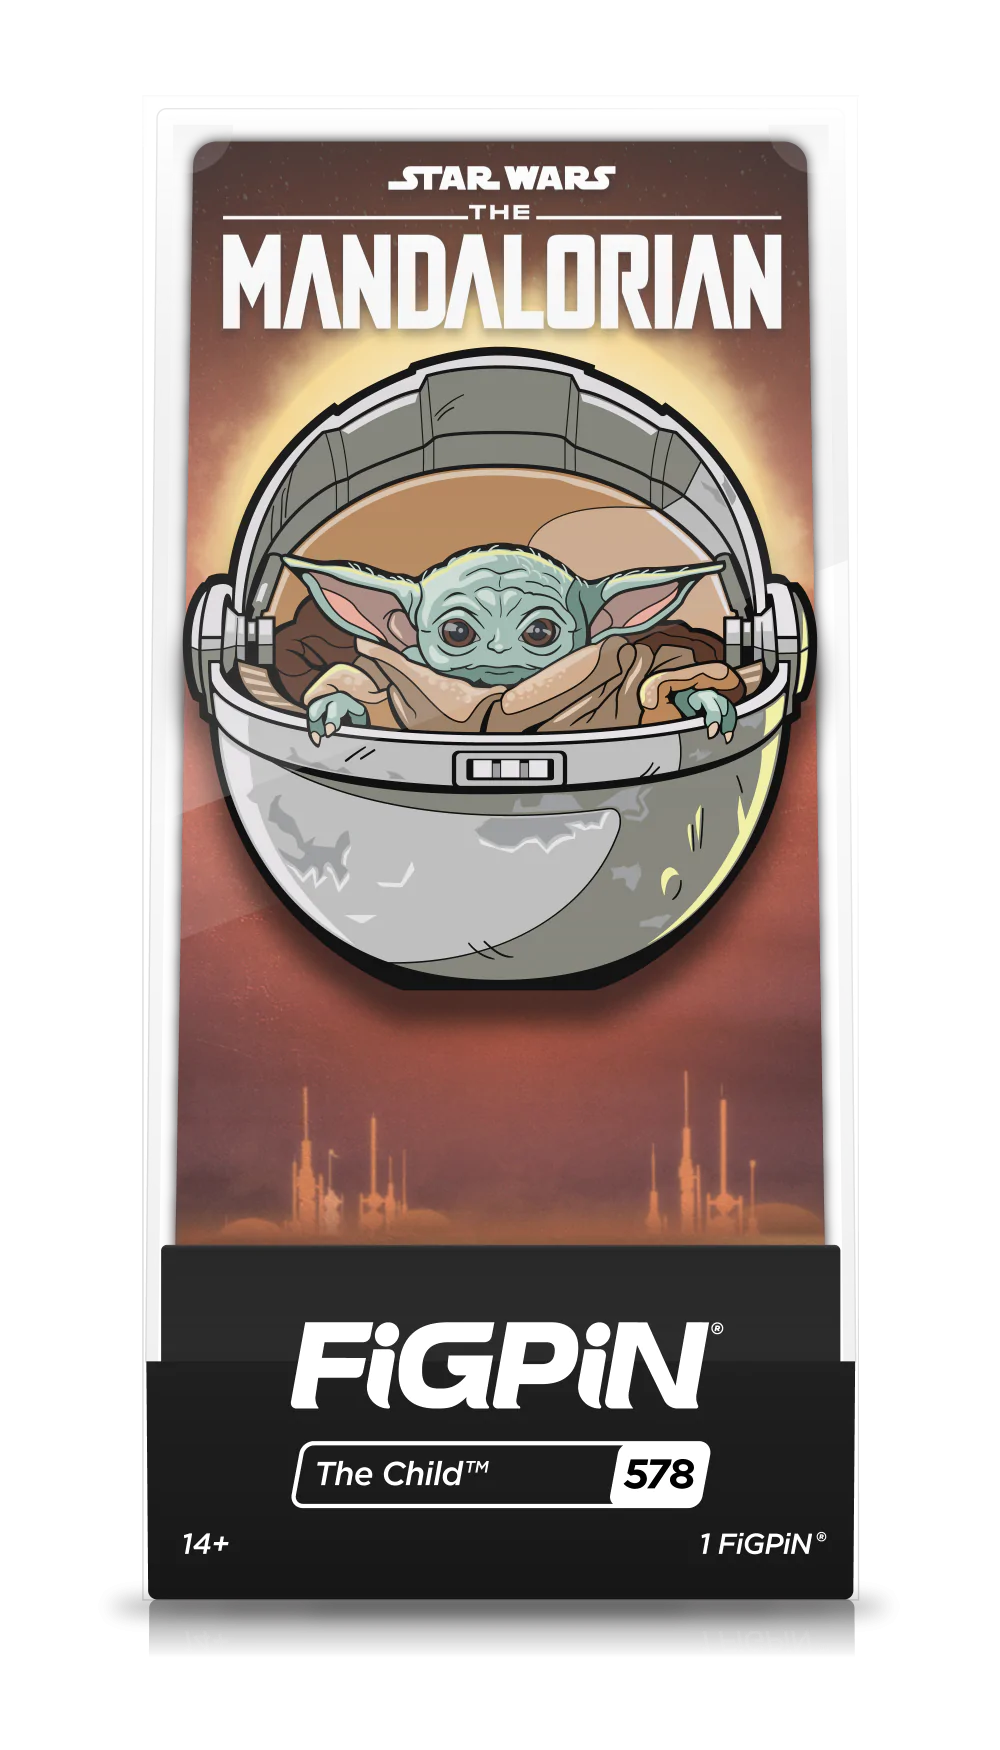 FiGPiN The Child (578) Property: Star Wars The Mandalorian